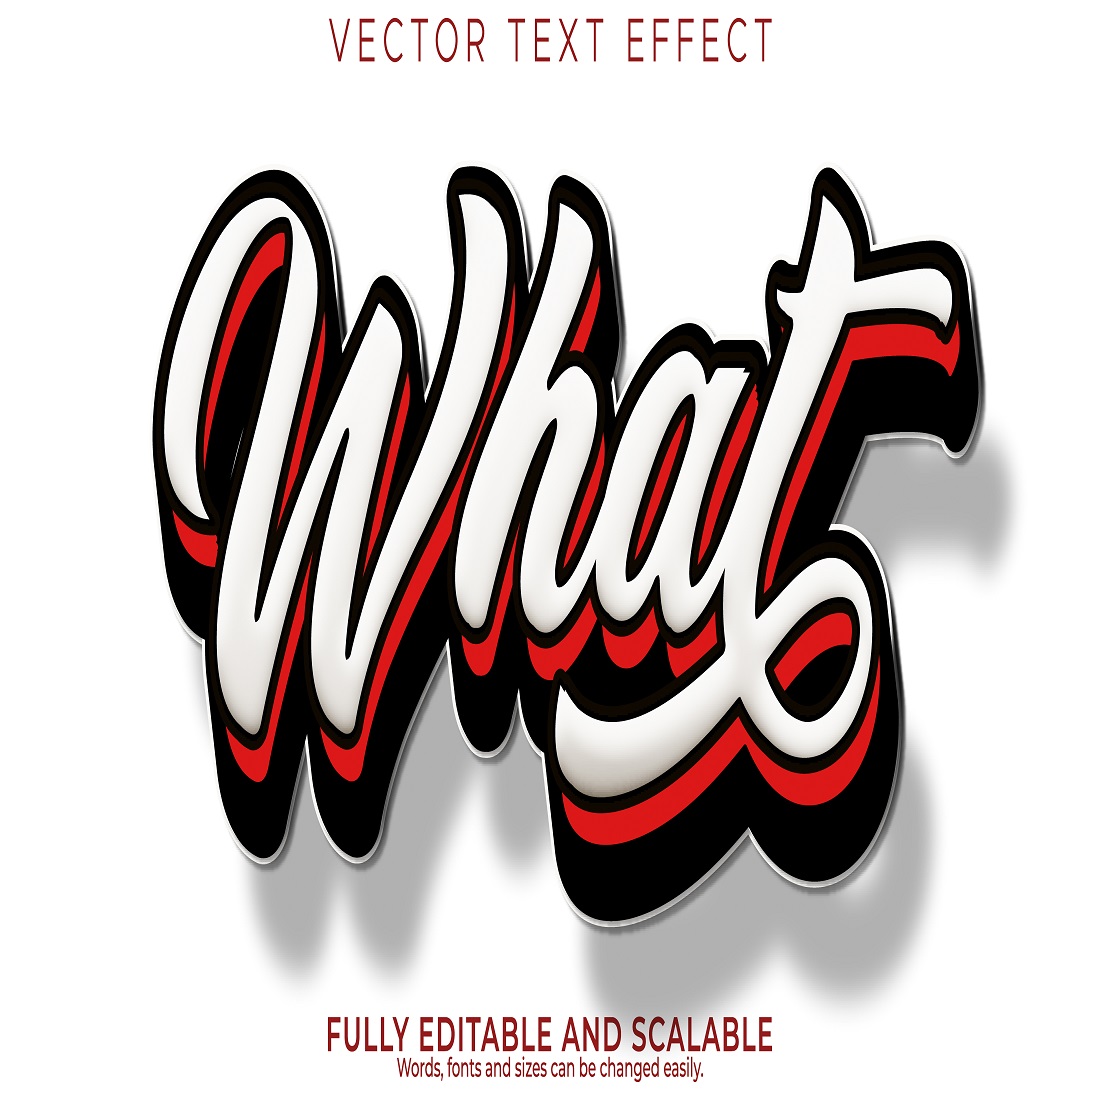 What text effect editable modern lettering preview image.